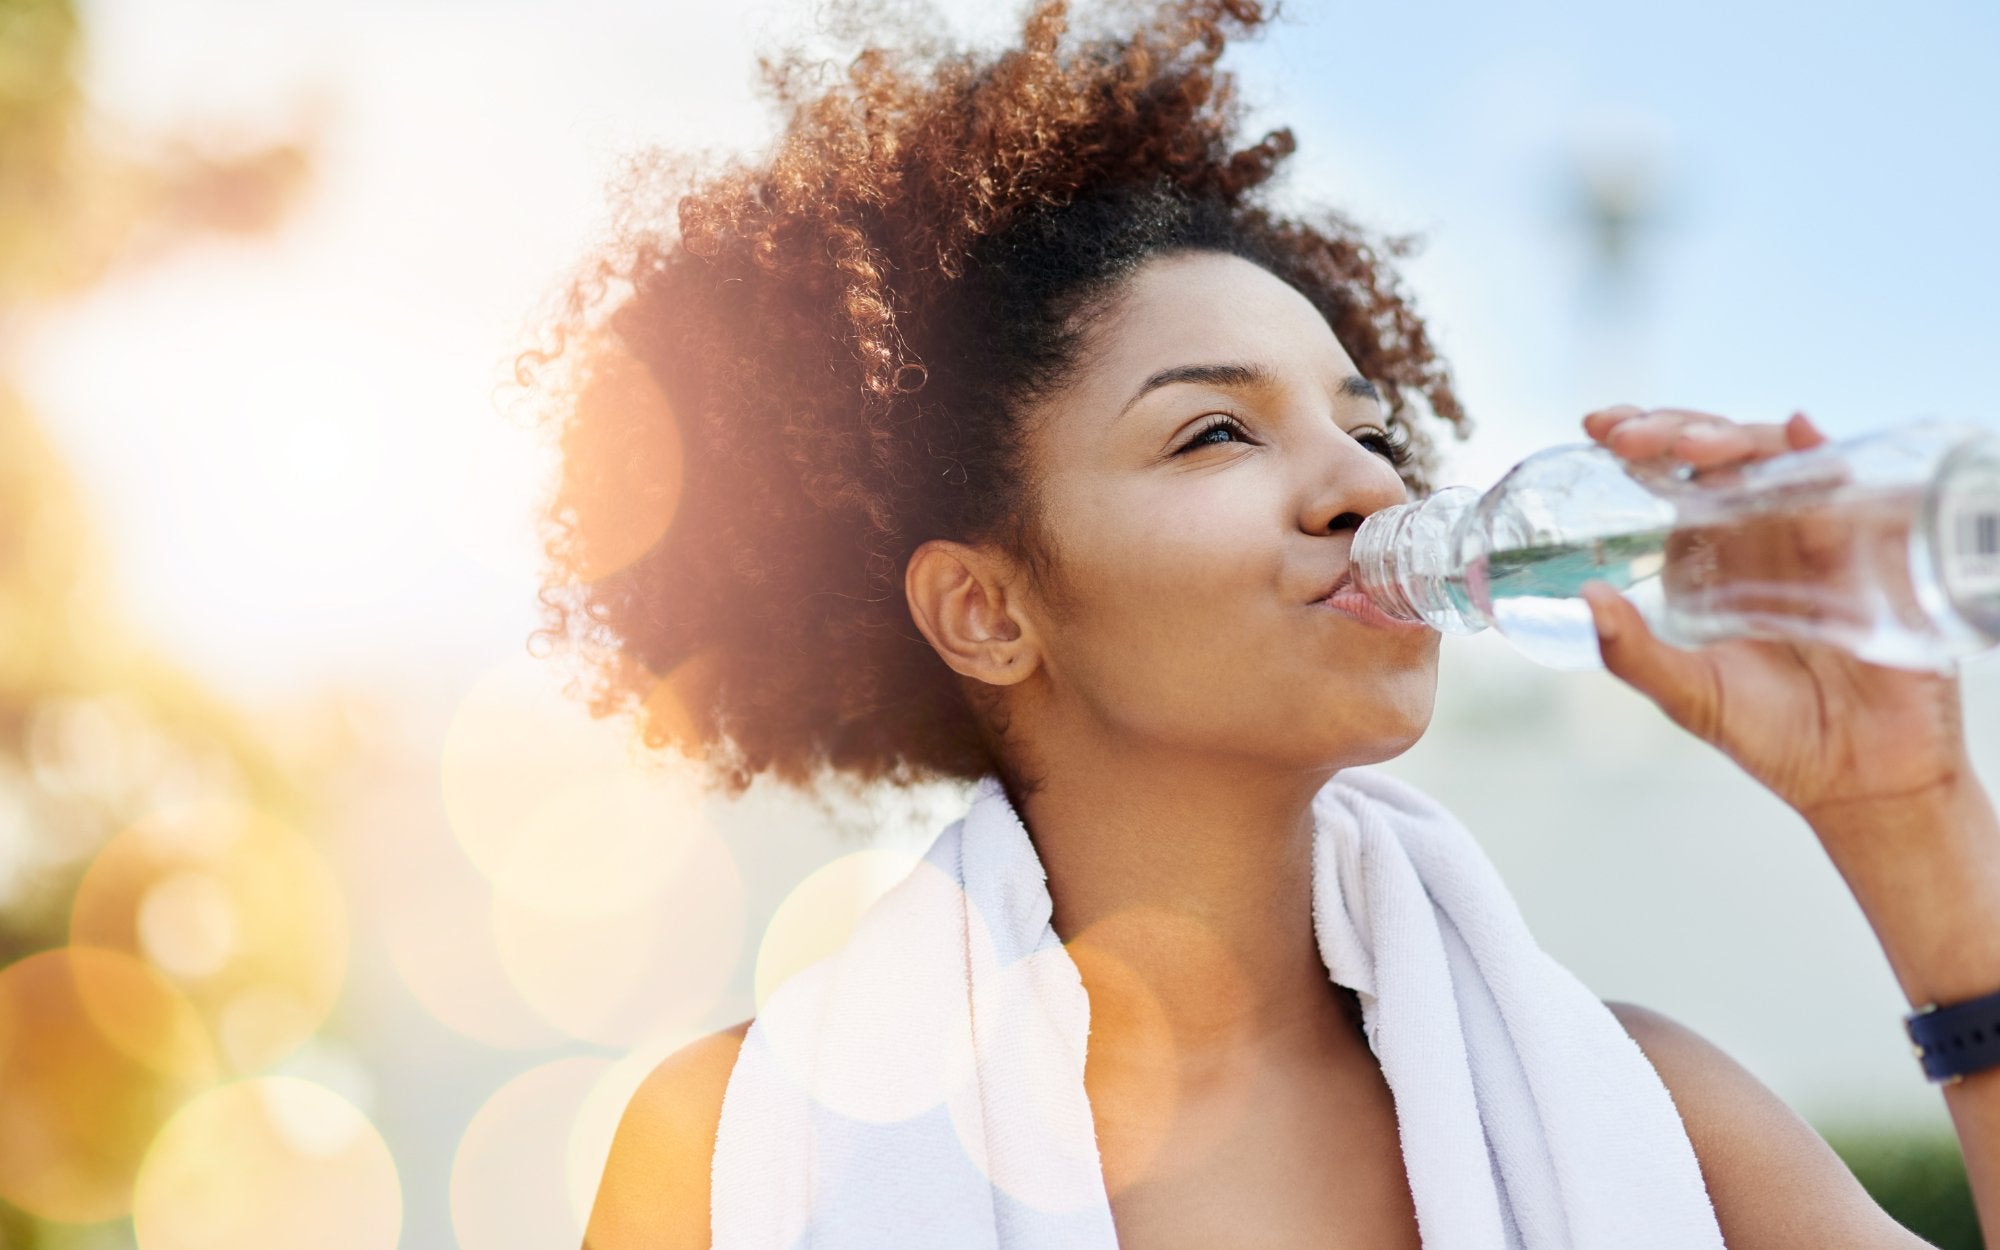 How to optimize water intake for better bladder health - Utiva USA